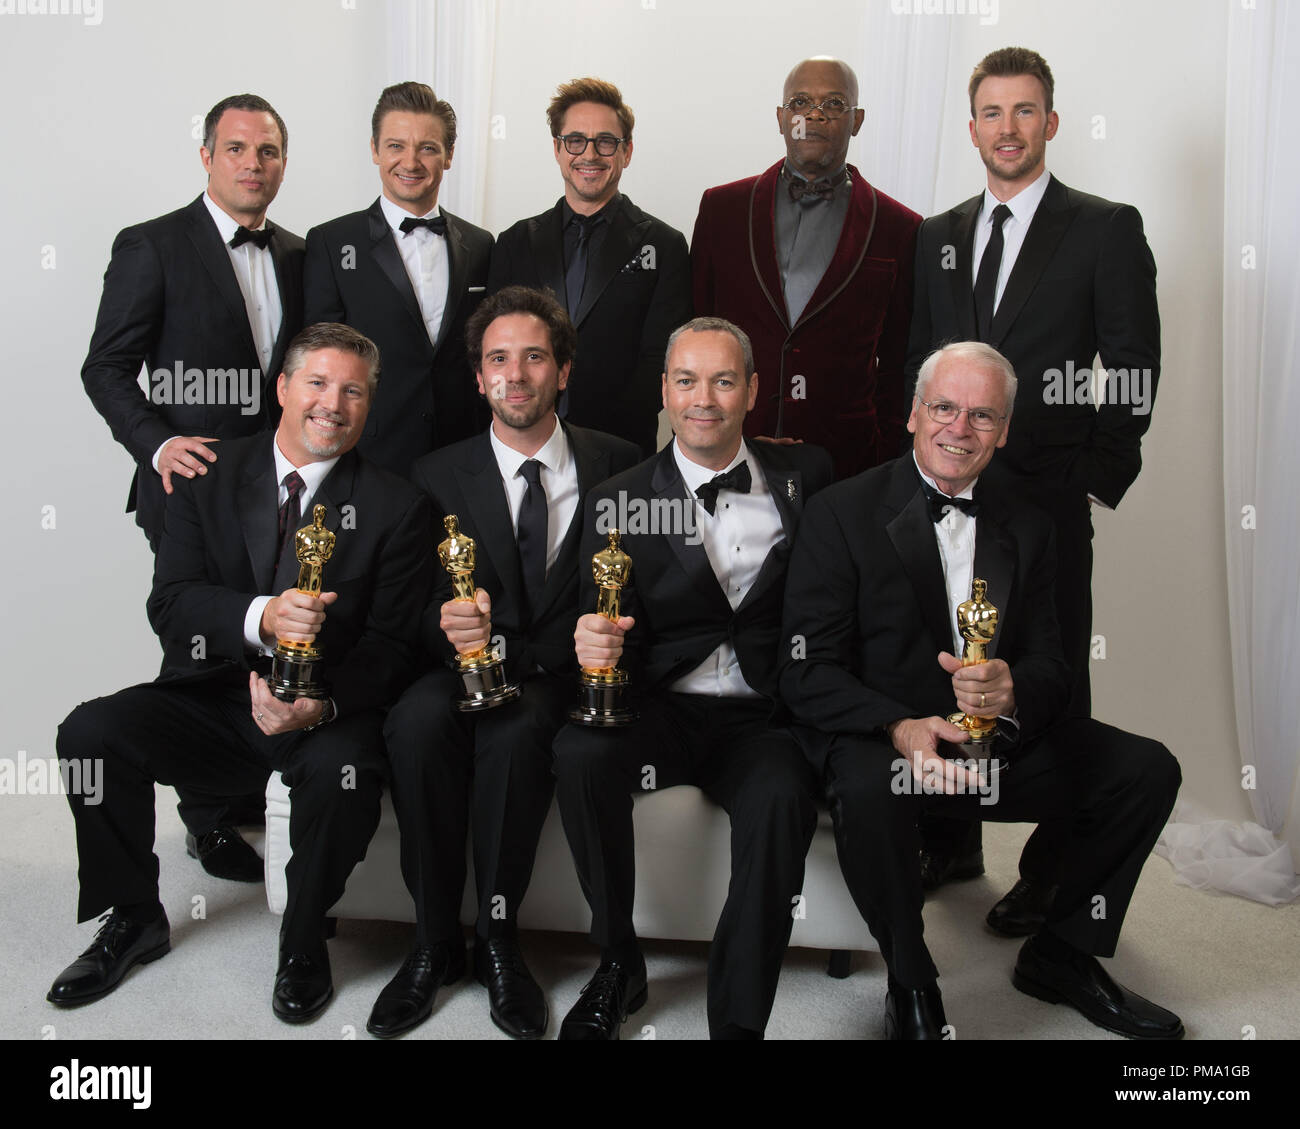 After winning the category achievement in visual effects for work on “Life of Pi”, Bill Westenhofer, Guillaume Rocheron, Erik-Jan De Boer and Donald R. Elliott pose backstage with the Oscar® and Mark Ruffalo, Jeremy Renner, Robert Downey Jr., Samuel L. Jackson, and Chris Evans during the live ABC network broadcast of The Oscars® from the Dolby® Theatre in Hollywood, CA, Sunday, February 24, 2013. Stock Photo